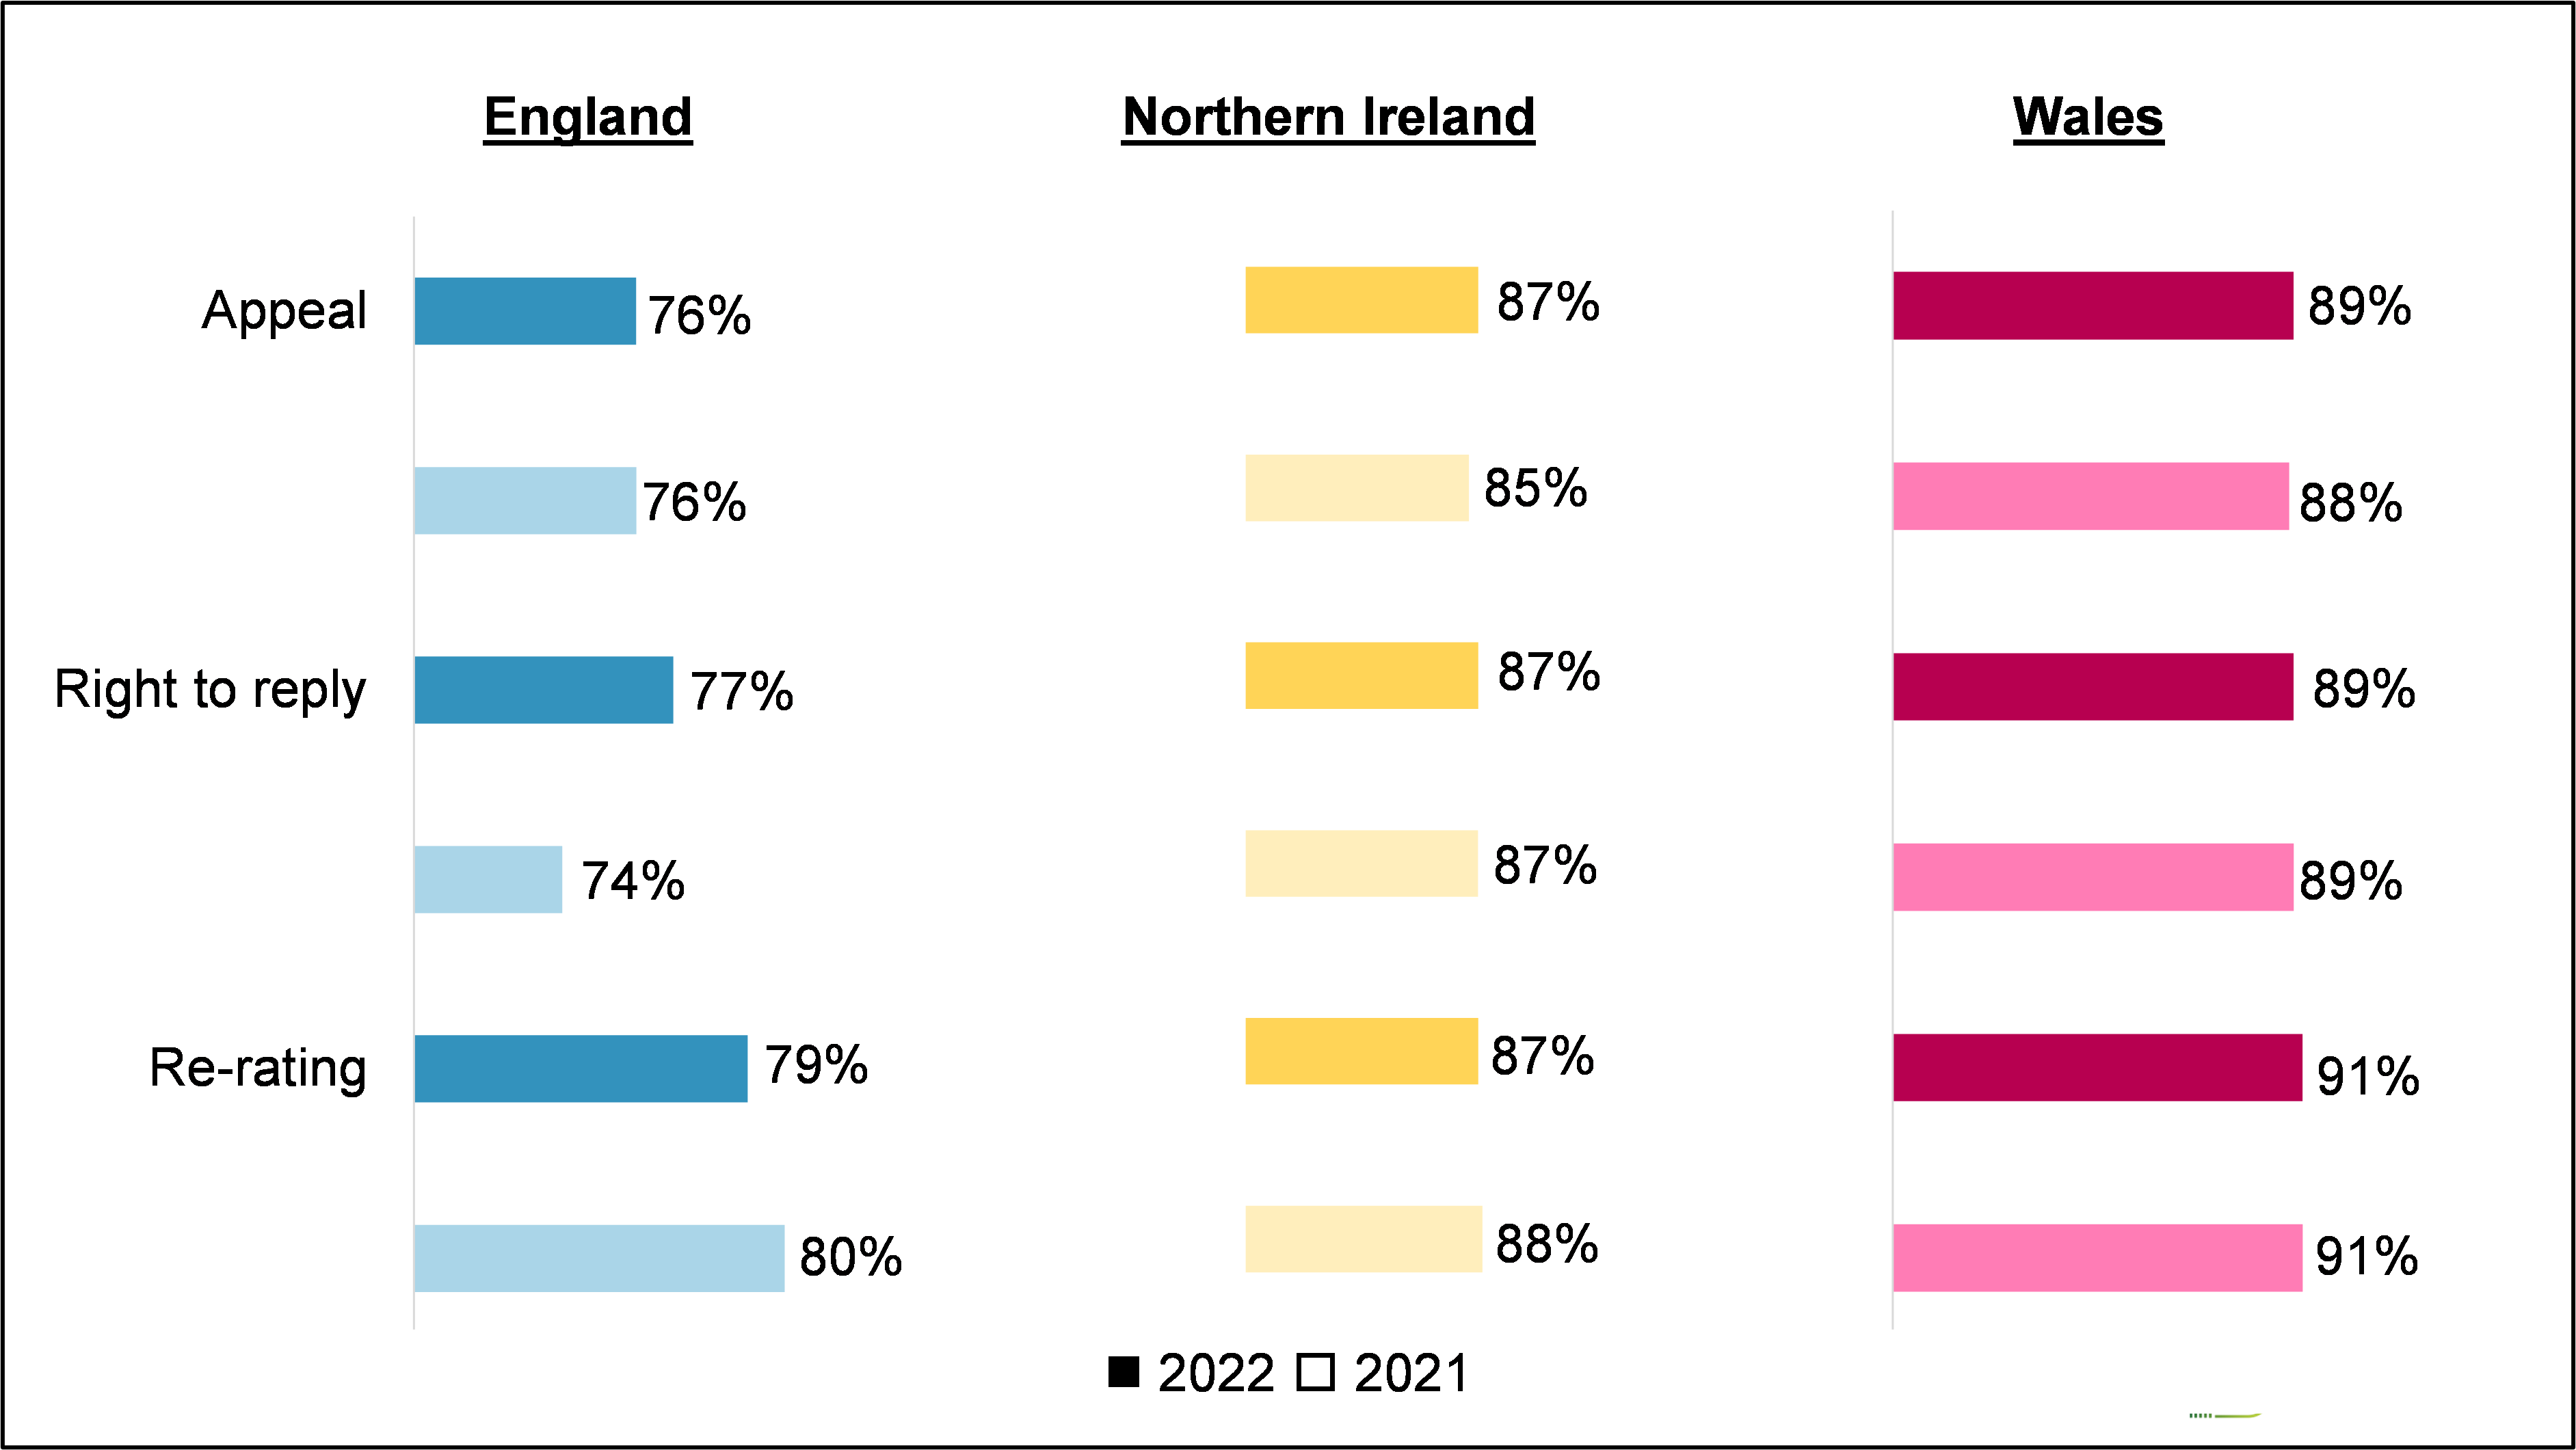 England: Appeal (2022 76%, 2021 76%), Right to reply (2022 77%, 2021 74%), Re-rating (2022 79%, 2021 80%).  Northern Ireland: Appeal (2022 87%, 2021 85%), Right to reply (2022 87%, 2021 87%), Re-rating (2022 87%, 2021 88%).  Wales: Appeal (2022 89%, 2021 88%), Right to reply (2022 89%, 2021 89%), Re-rating (2022 91%, 2021 91%).